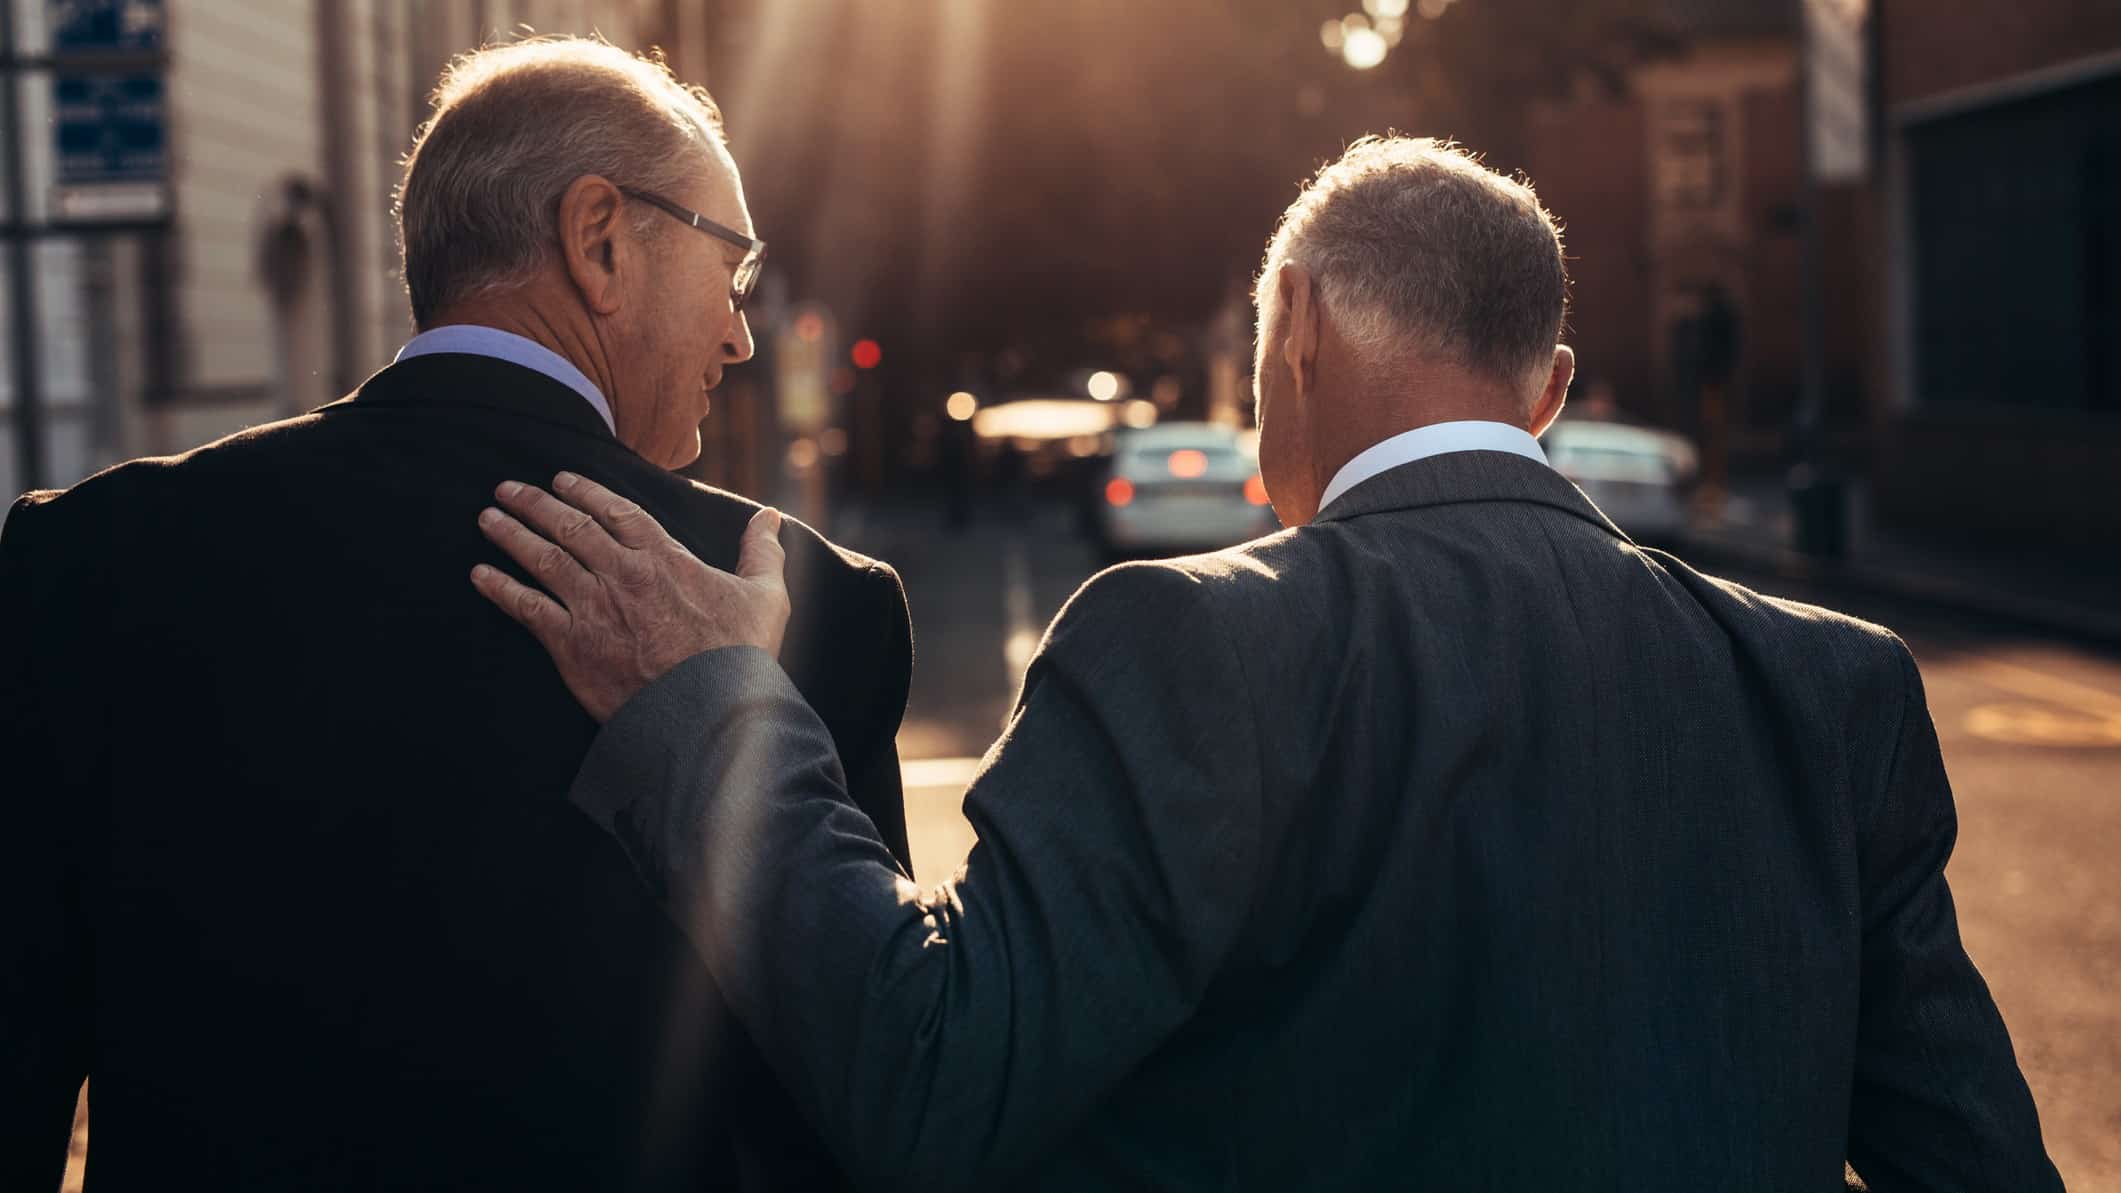 two men in suits with their backs to the camera walk off into a sunset on a city street with one placing his hand on his companion's shoulder as if in a fond gesture.